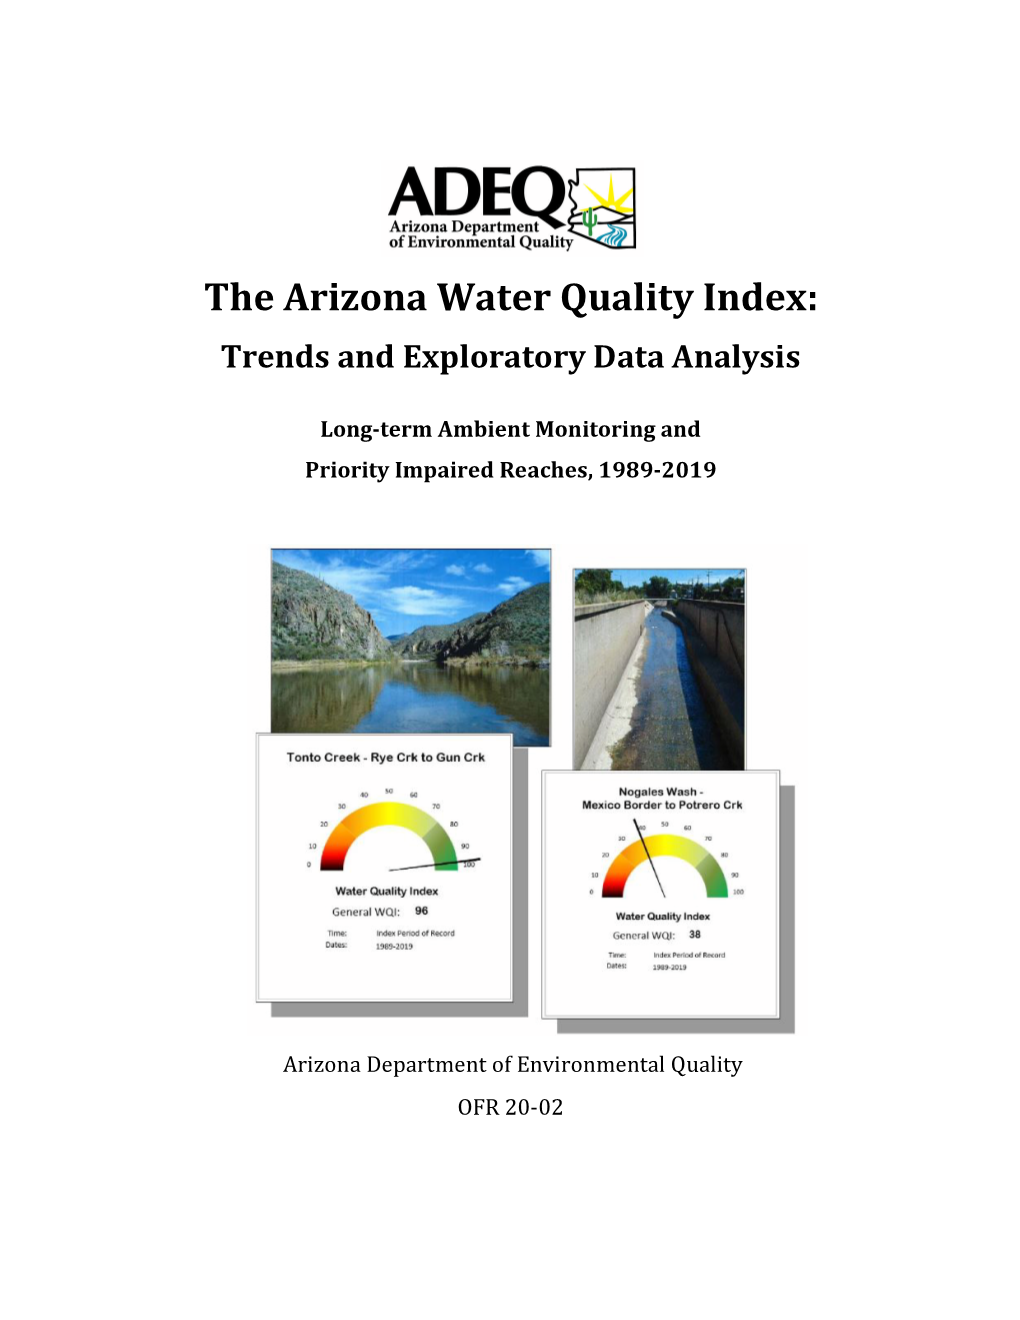 The Arizona Water Quality Index: Trends and Exploratory Data Analysis